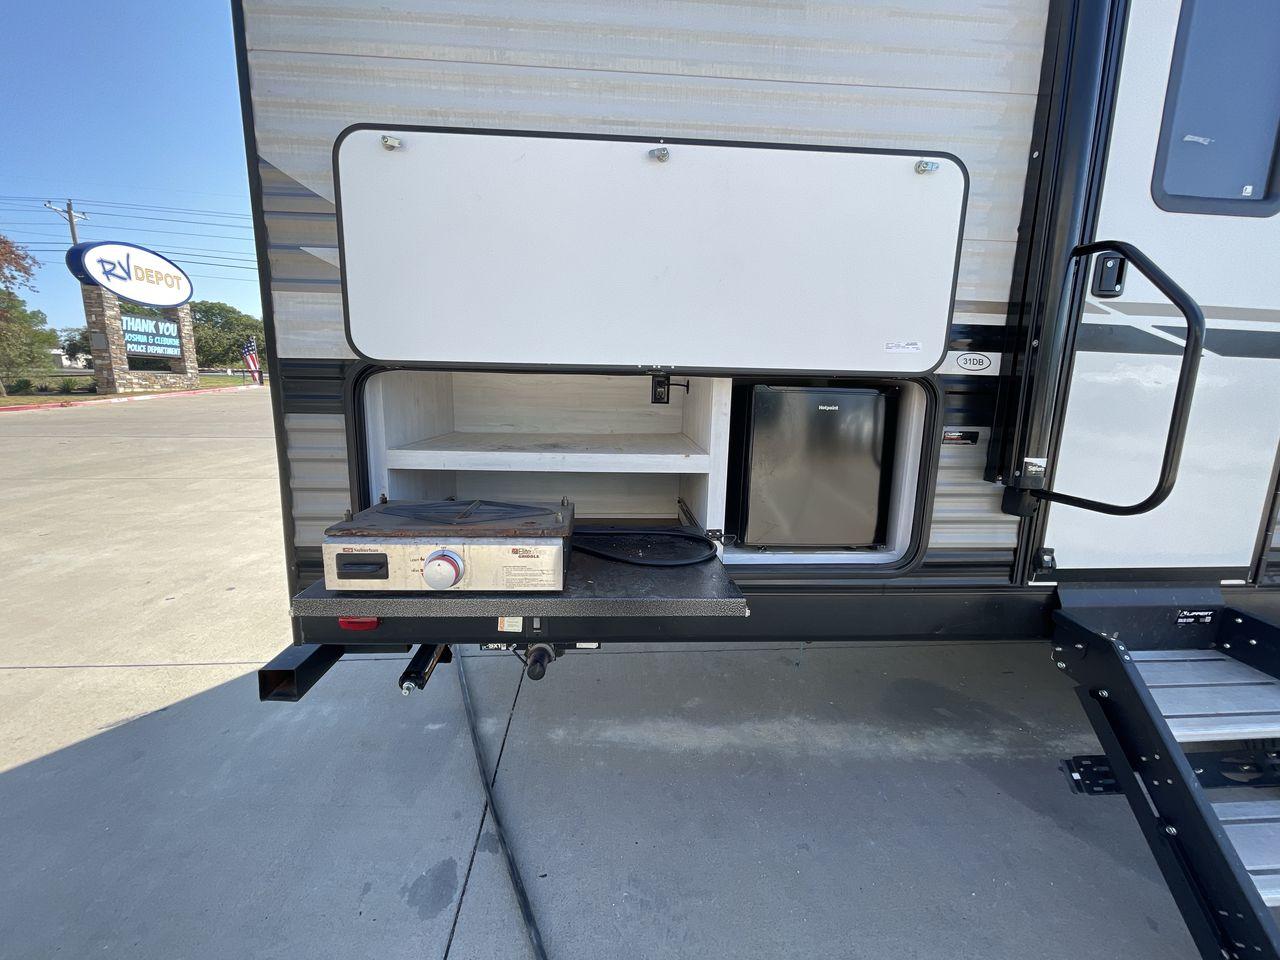 2022 HEARTLAND TRAIL RUNNER 31DB (5SFEB3728NE) , Length: 36.92 ft. | Dry Weight: 7,040 lbs. | Gross Weight: 9,642 lbs. | Slides: 1 transmission, located at 4319 N Main St, Cleburne, TX, 76033, (817) 678-5133, 32.385960, -97.391212 - Discover extra features that contribute to making this RV an ideal investment. (1) It features like a designated pet feeding station and easy-to-clean flooring, making your pet feel just as welcome as the human members of the crew. (2) The Trail Runner 31DB features a convenient pass-through st - Photo #22